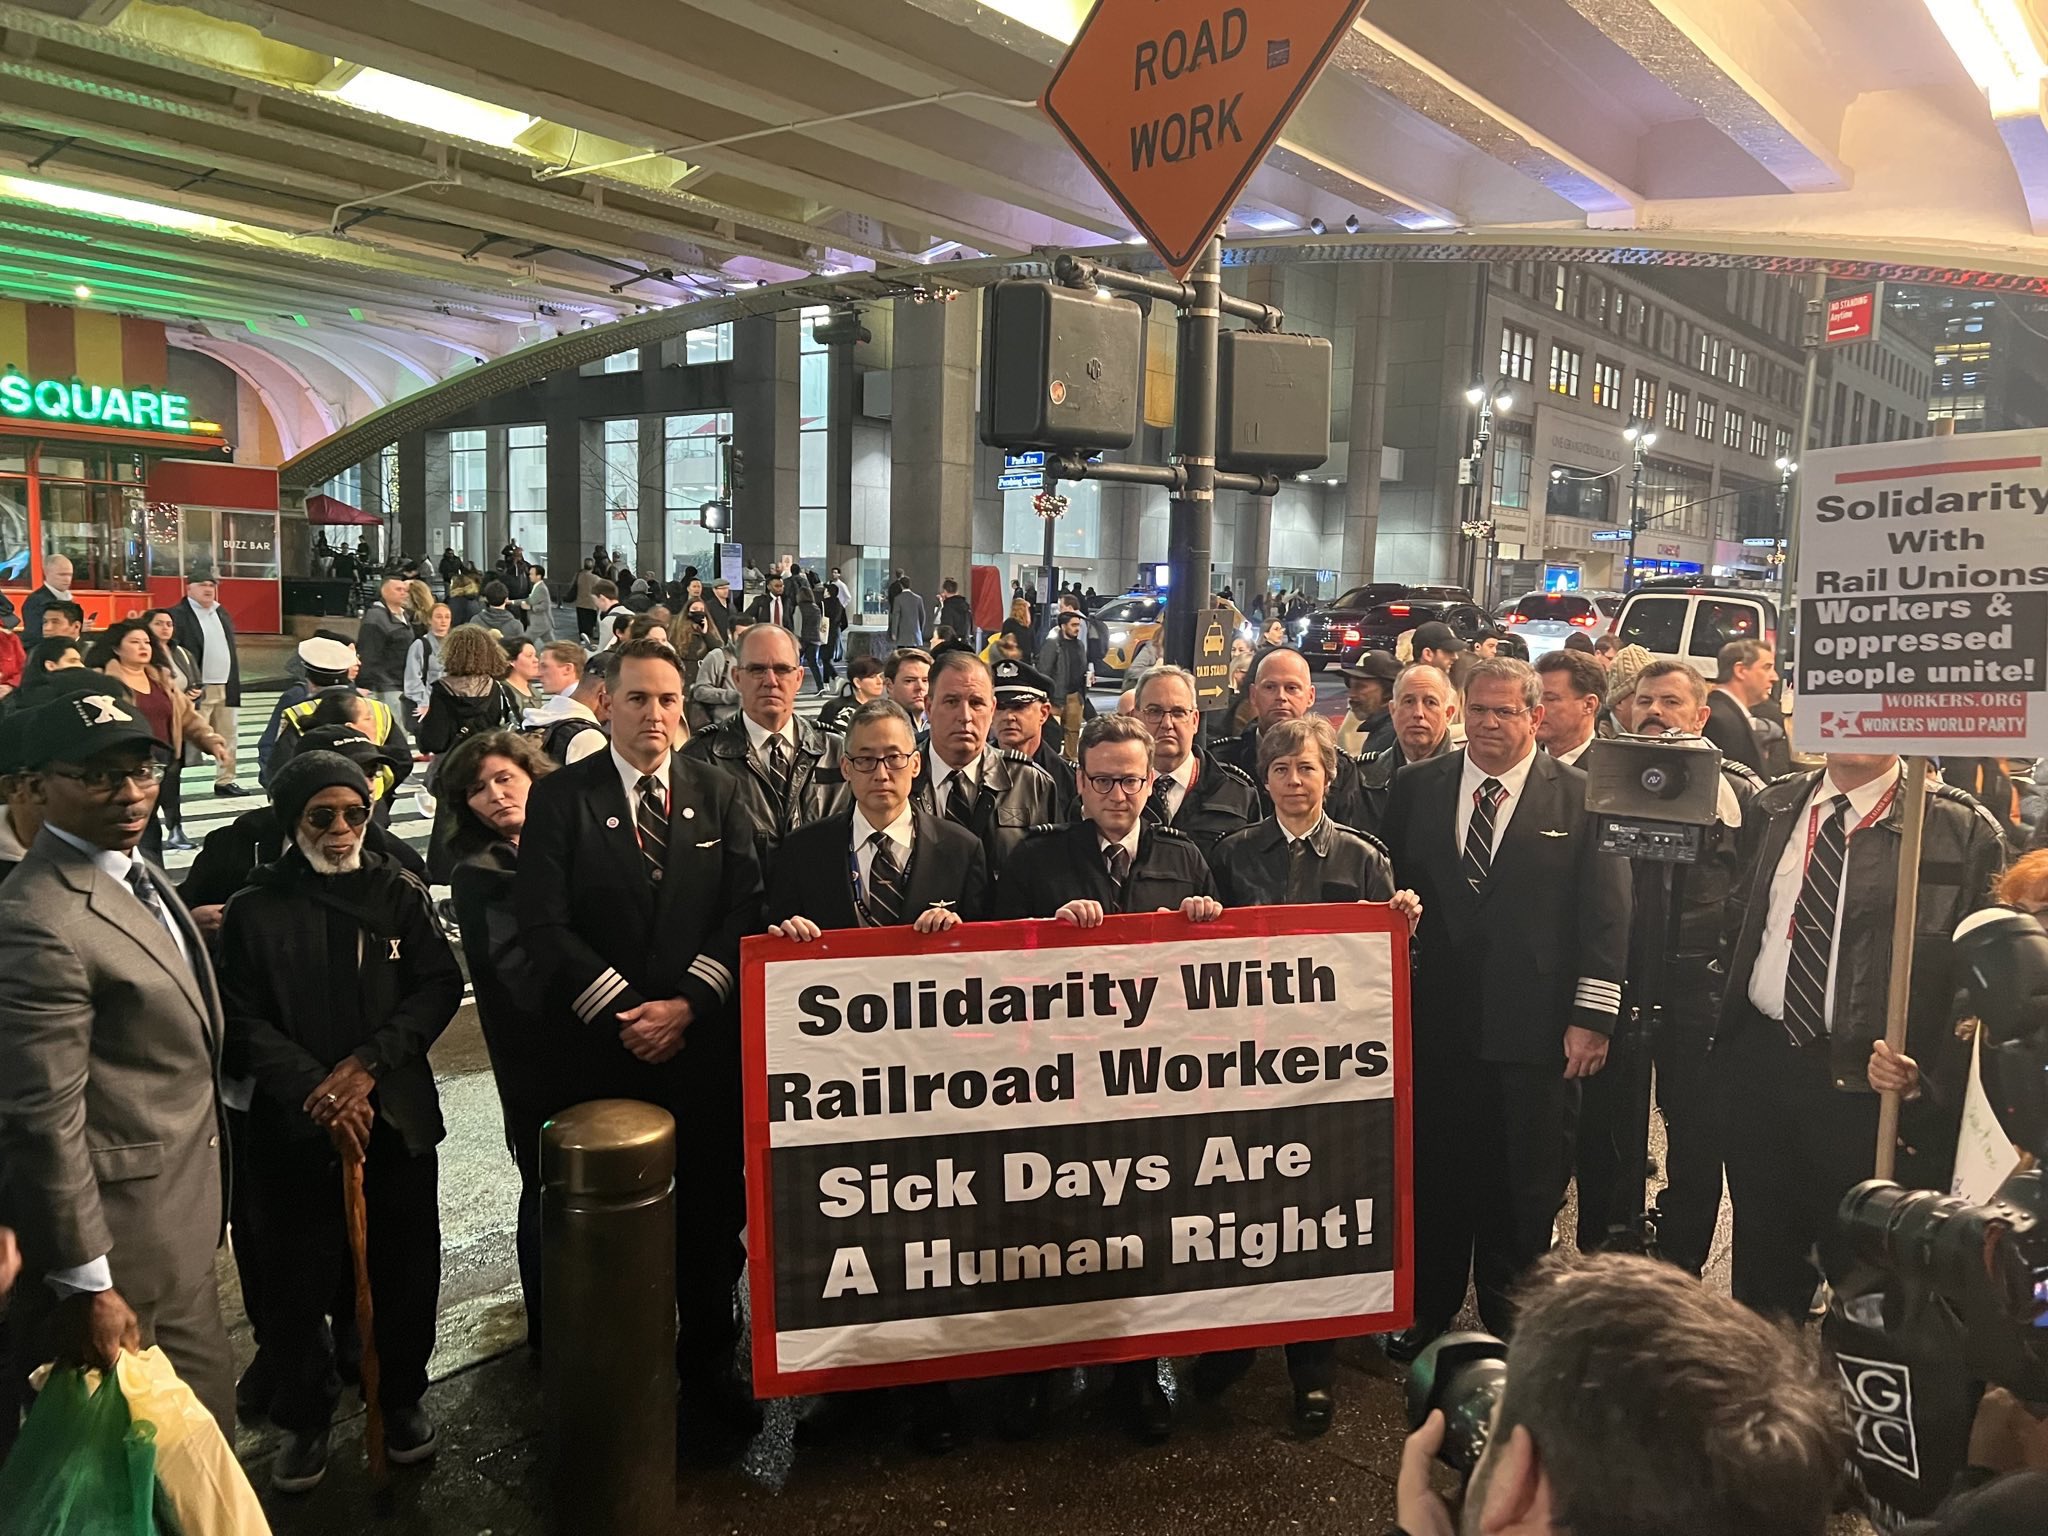 Railroad workers in uniform stand behind a banner that reads, “Solidarity with Railroad Workers Sick Days Are A Human Right!”